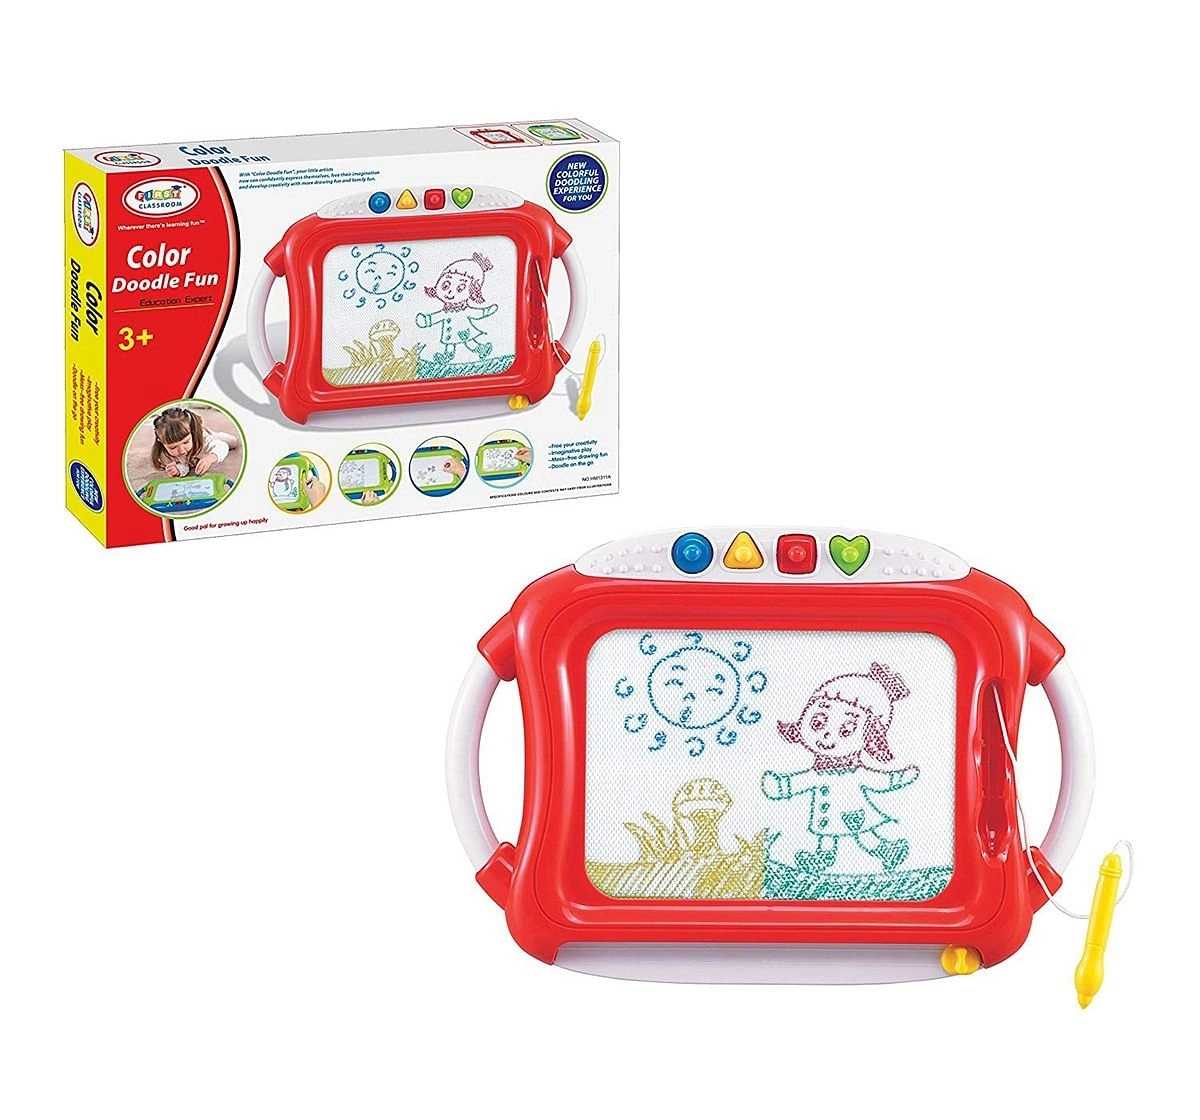 Comdaq First Classroom Doodle Board 2 In 1 with Stamp Activity for Kids age 3Y+ (Red)